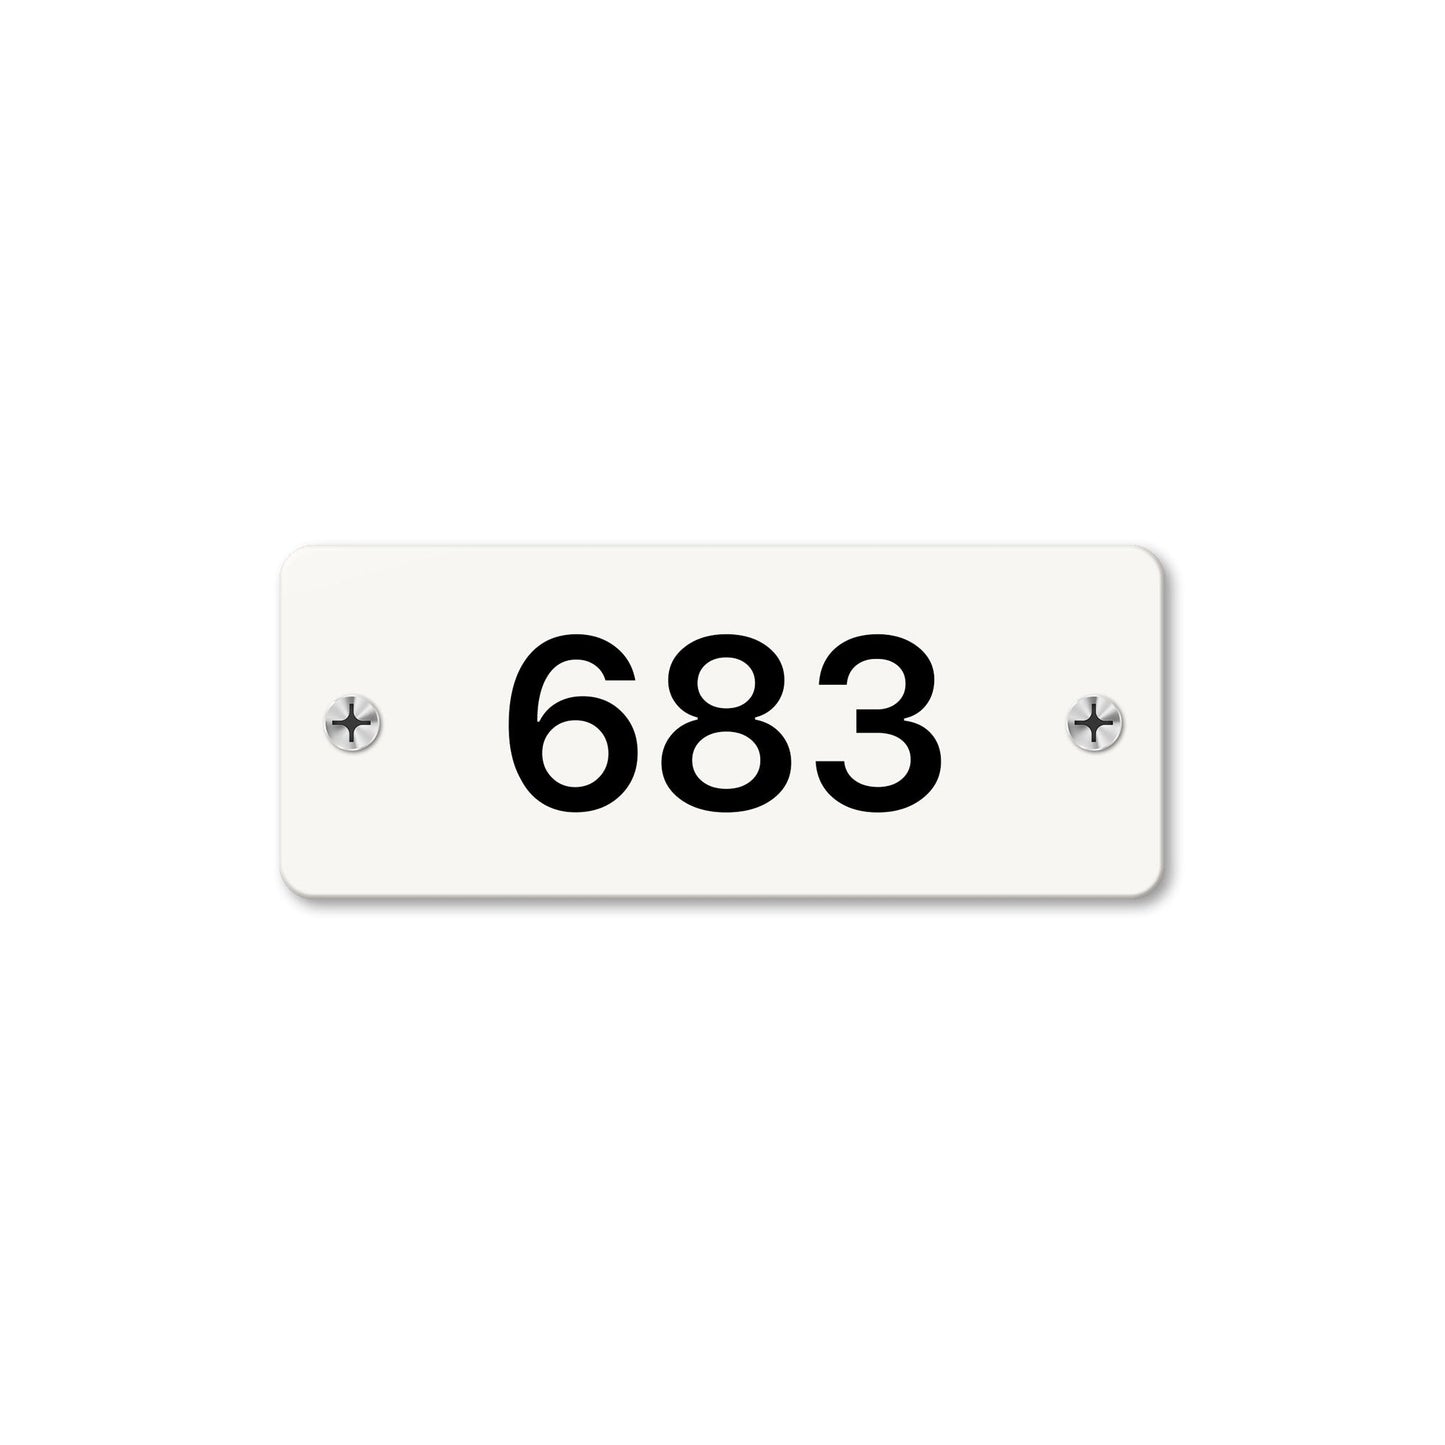 Numeral 683